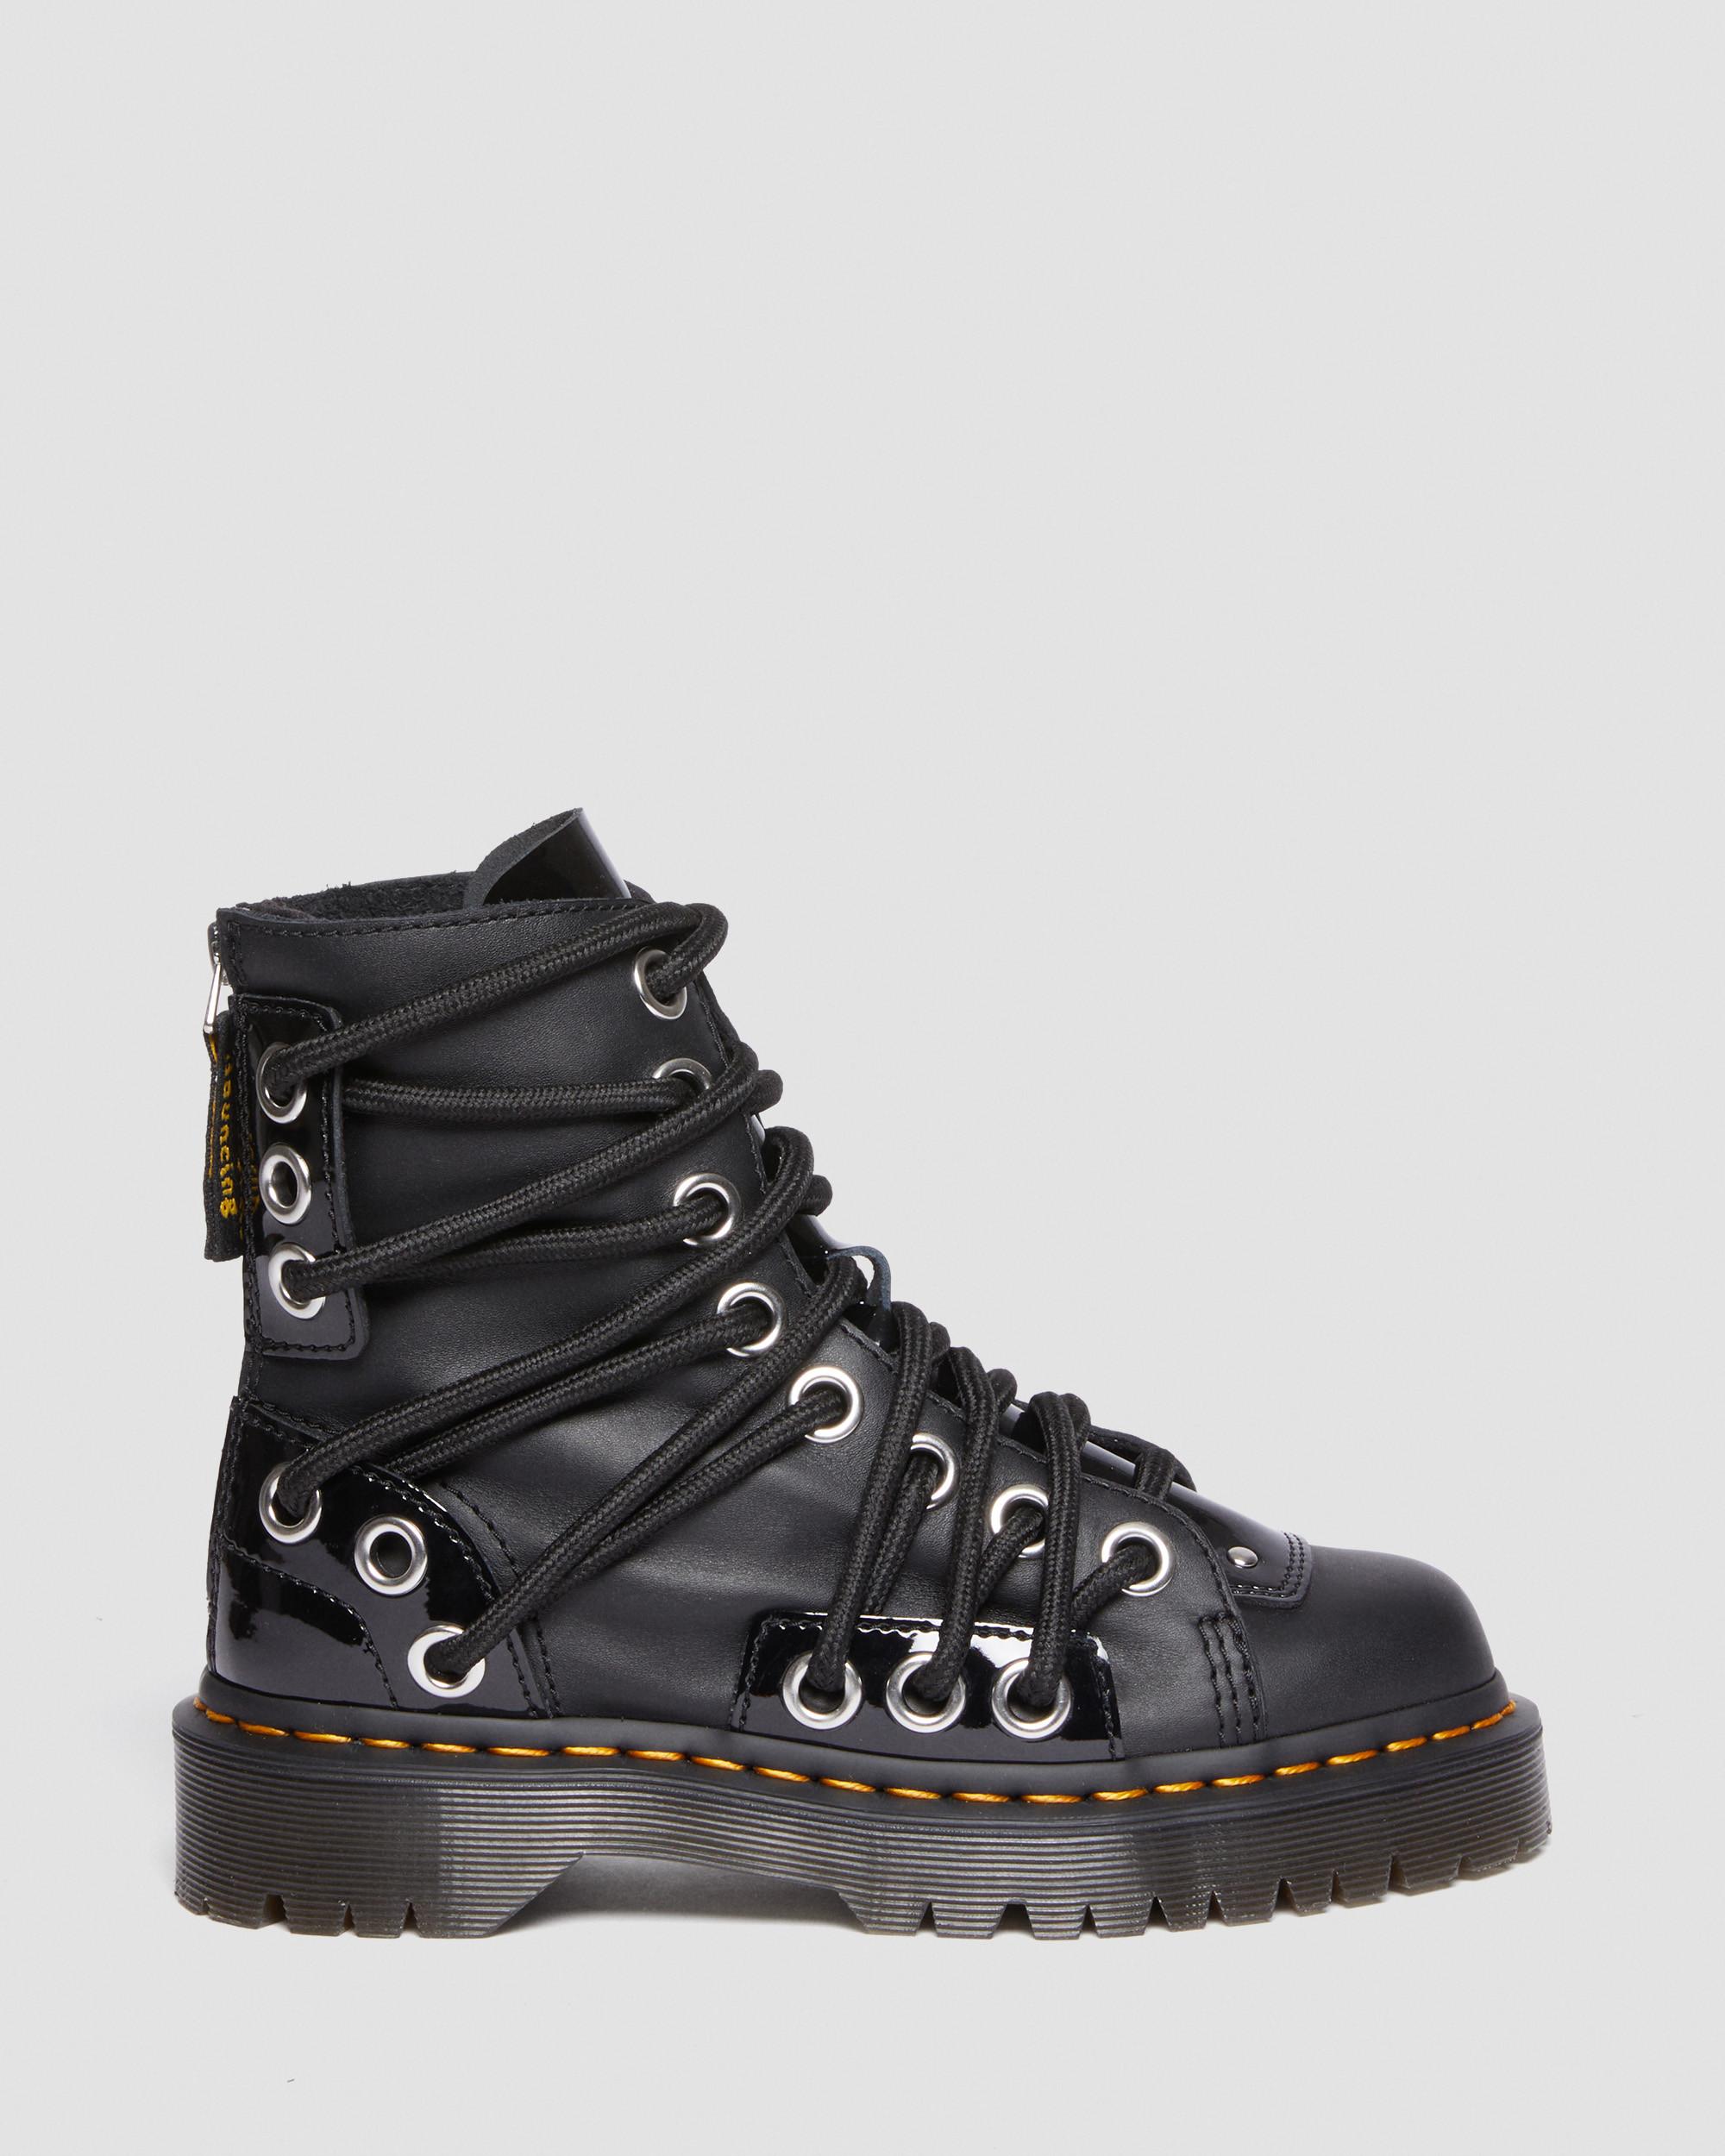 Daria Bex Leather Lace Up BootsDaria Bex Leather Lace Up Boots Dr. Martens